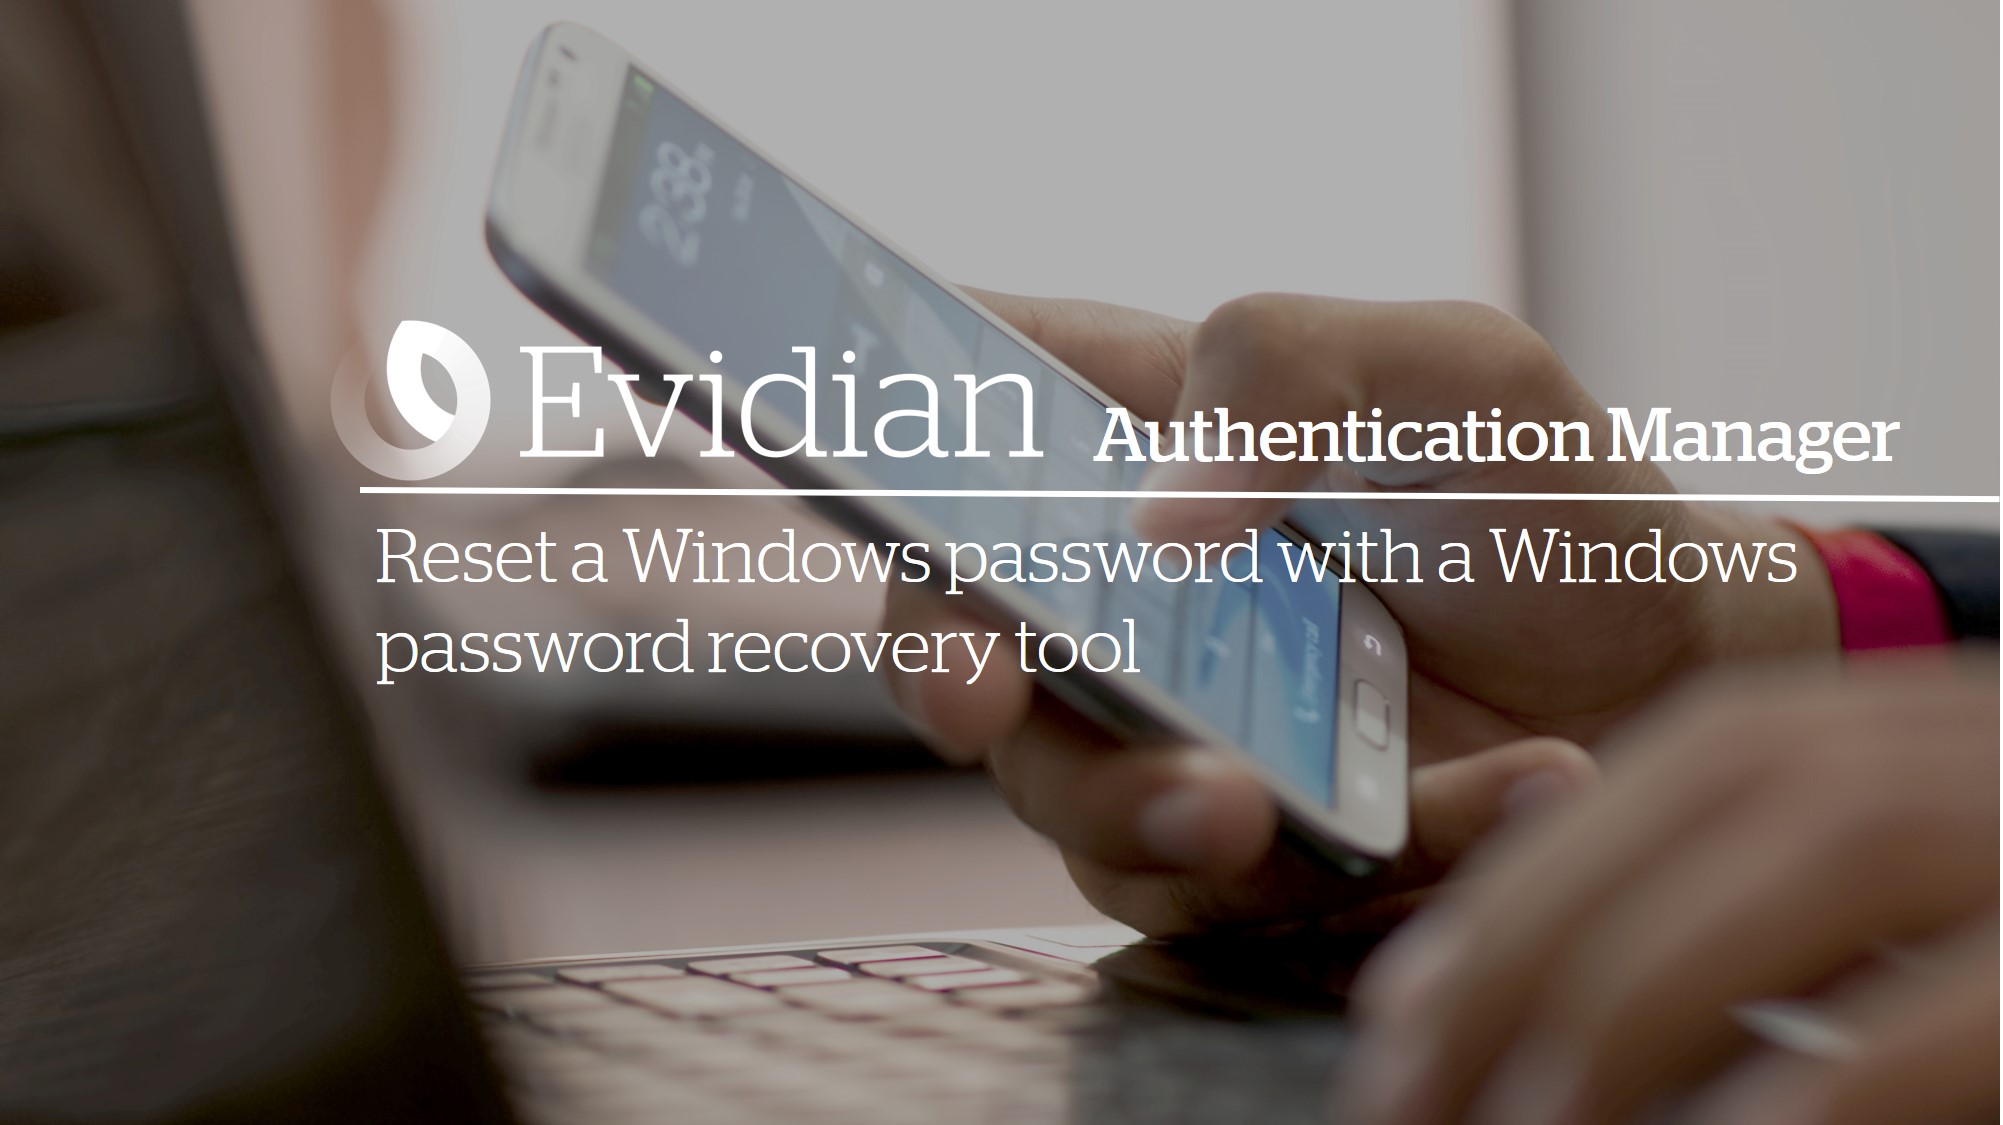 Reset a Windows password with a Windows password recovery tool